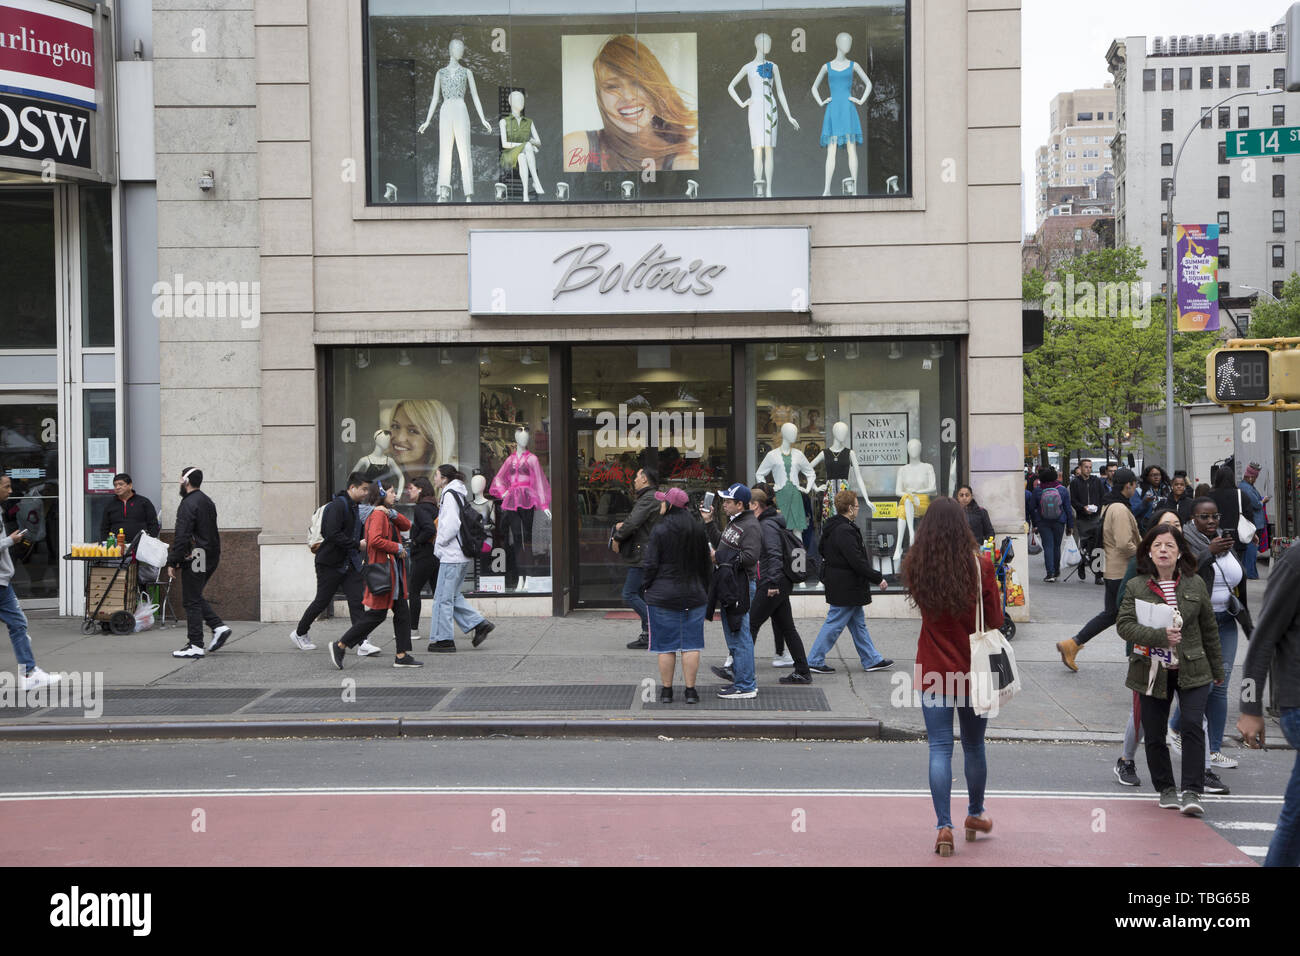 People walk by Bolton's on 14th Street at University Place across from Union Square in New York City. Stock Photo